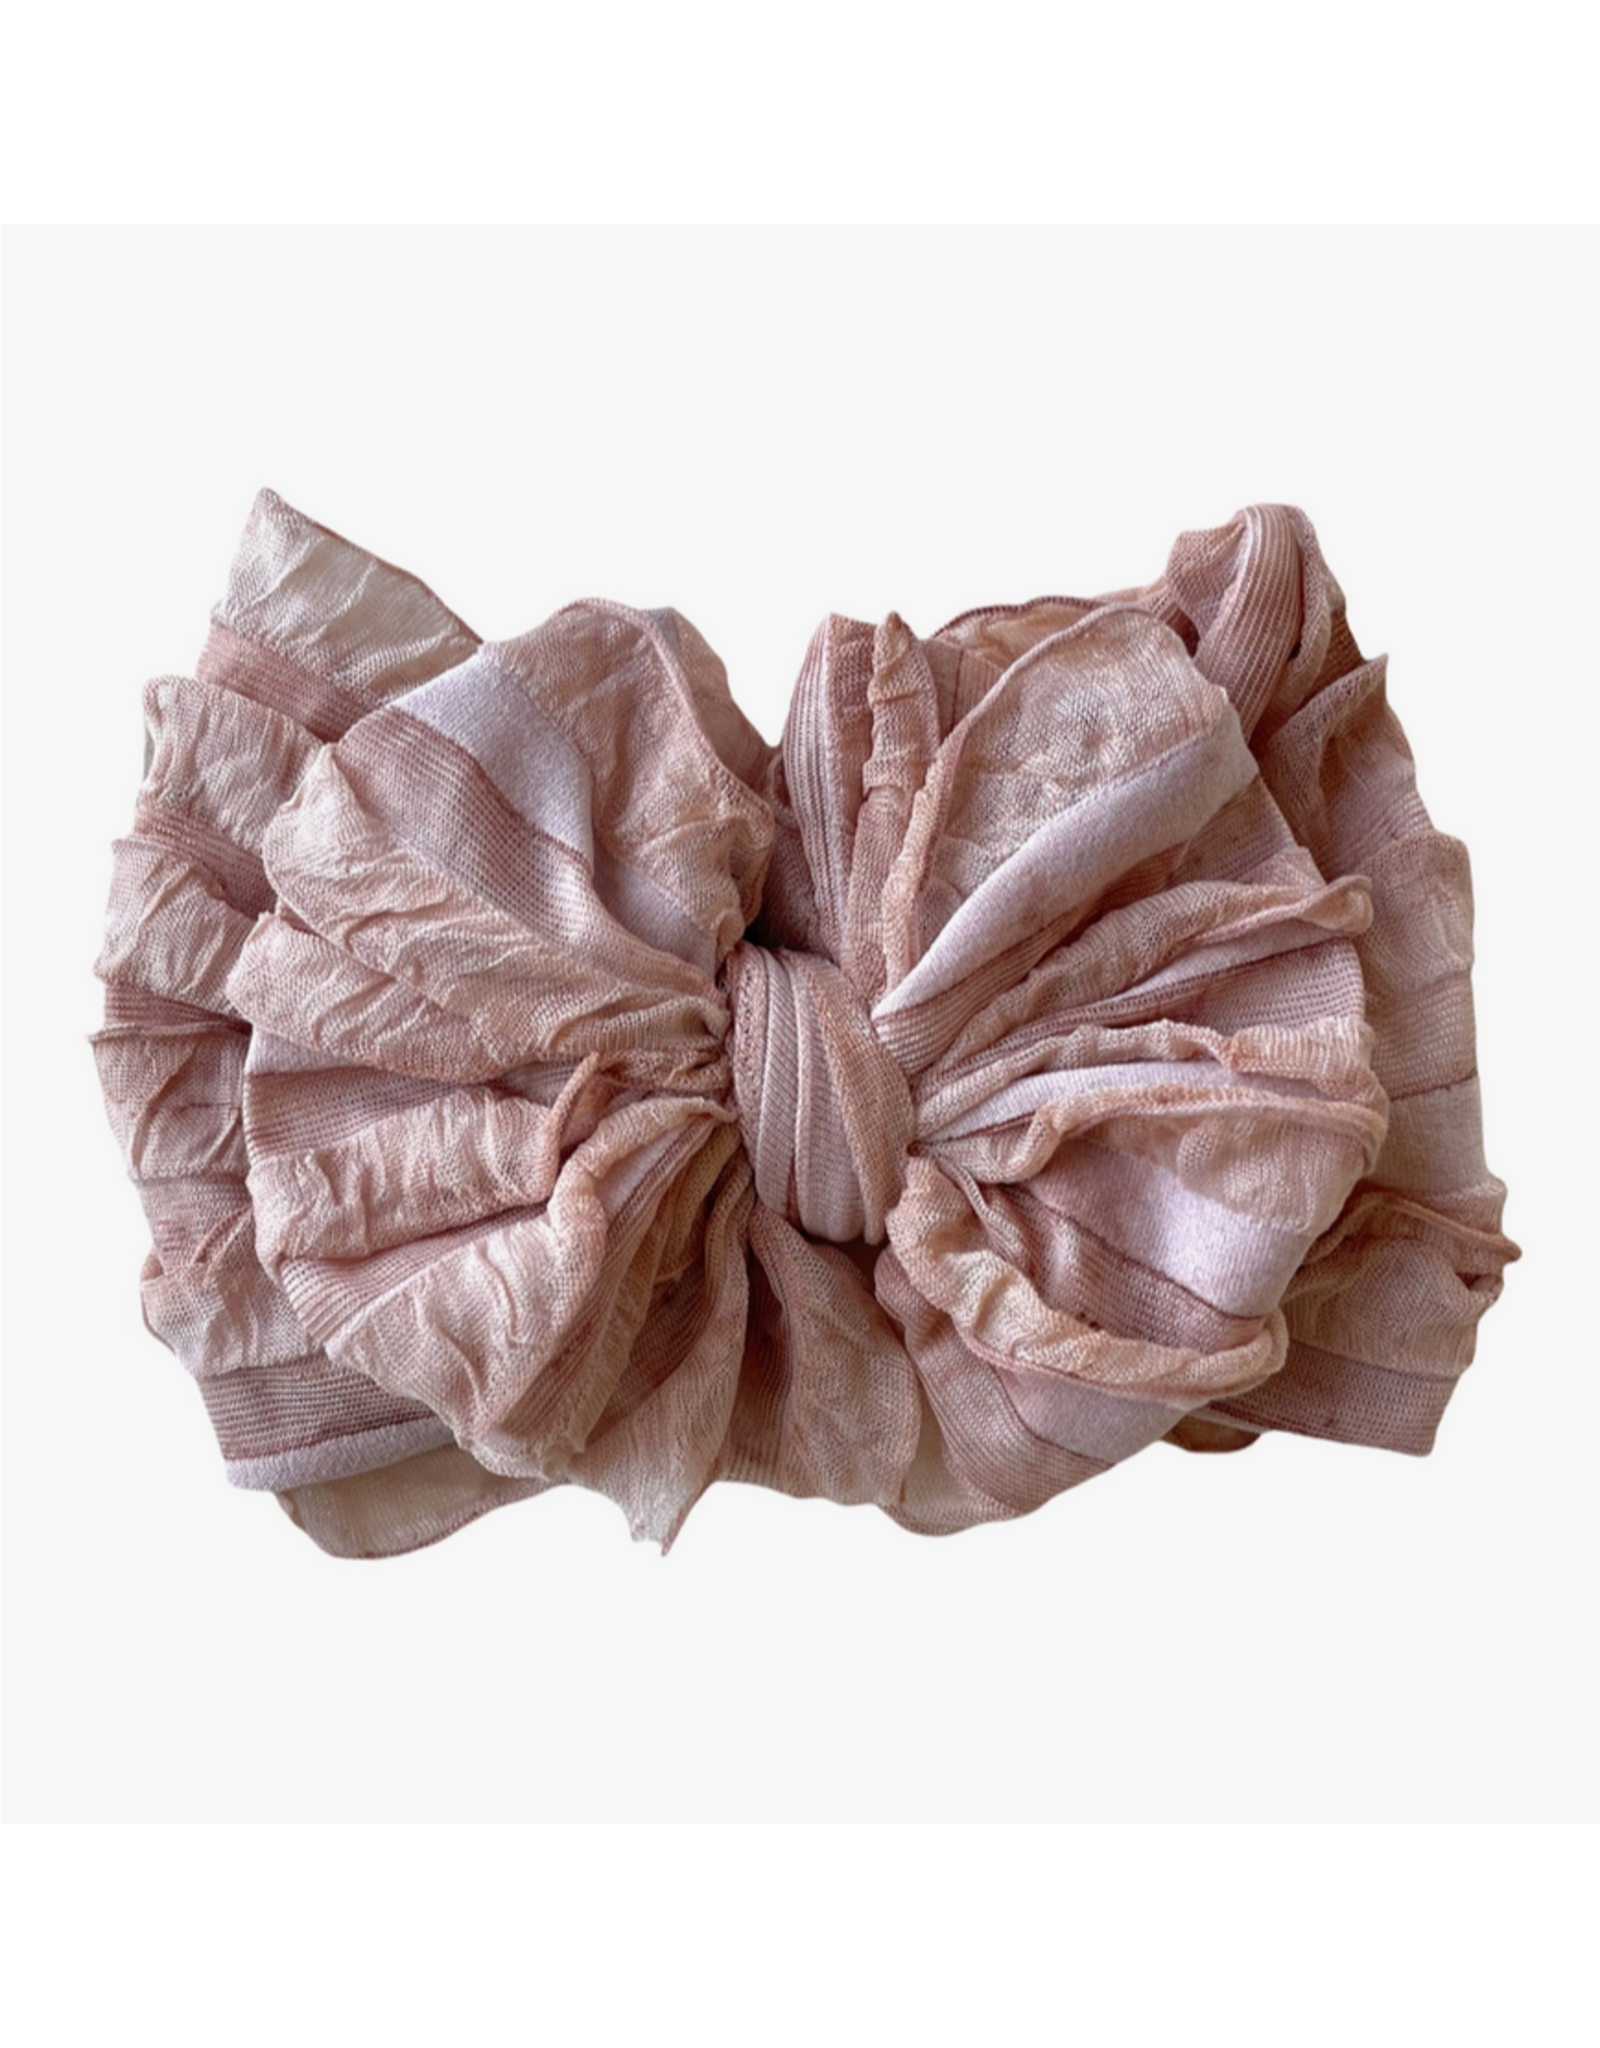 in awe couture Brulee Tie Dyed Ruffled Headband